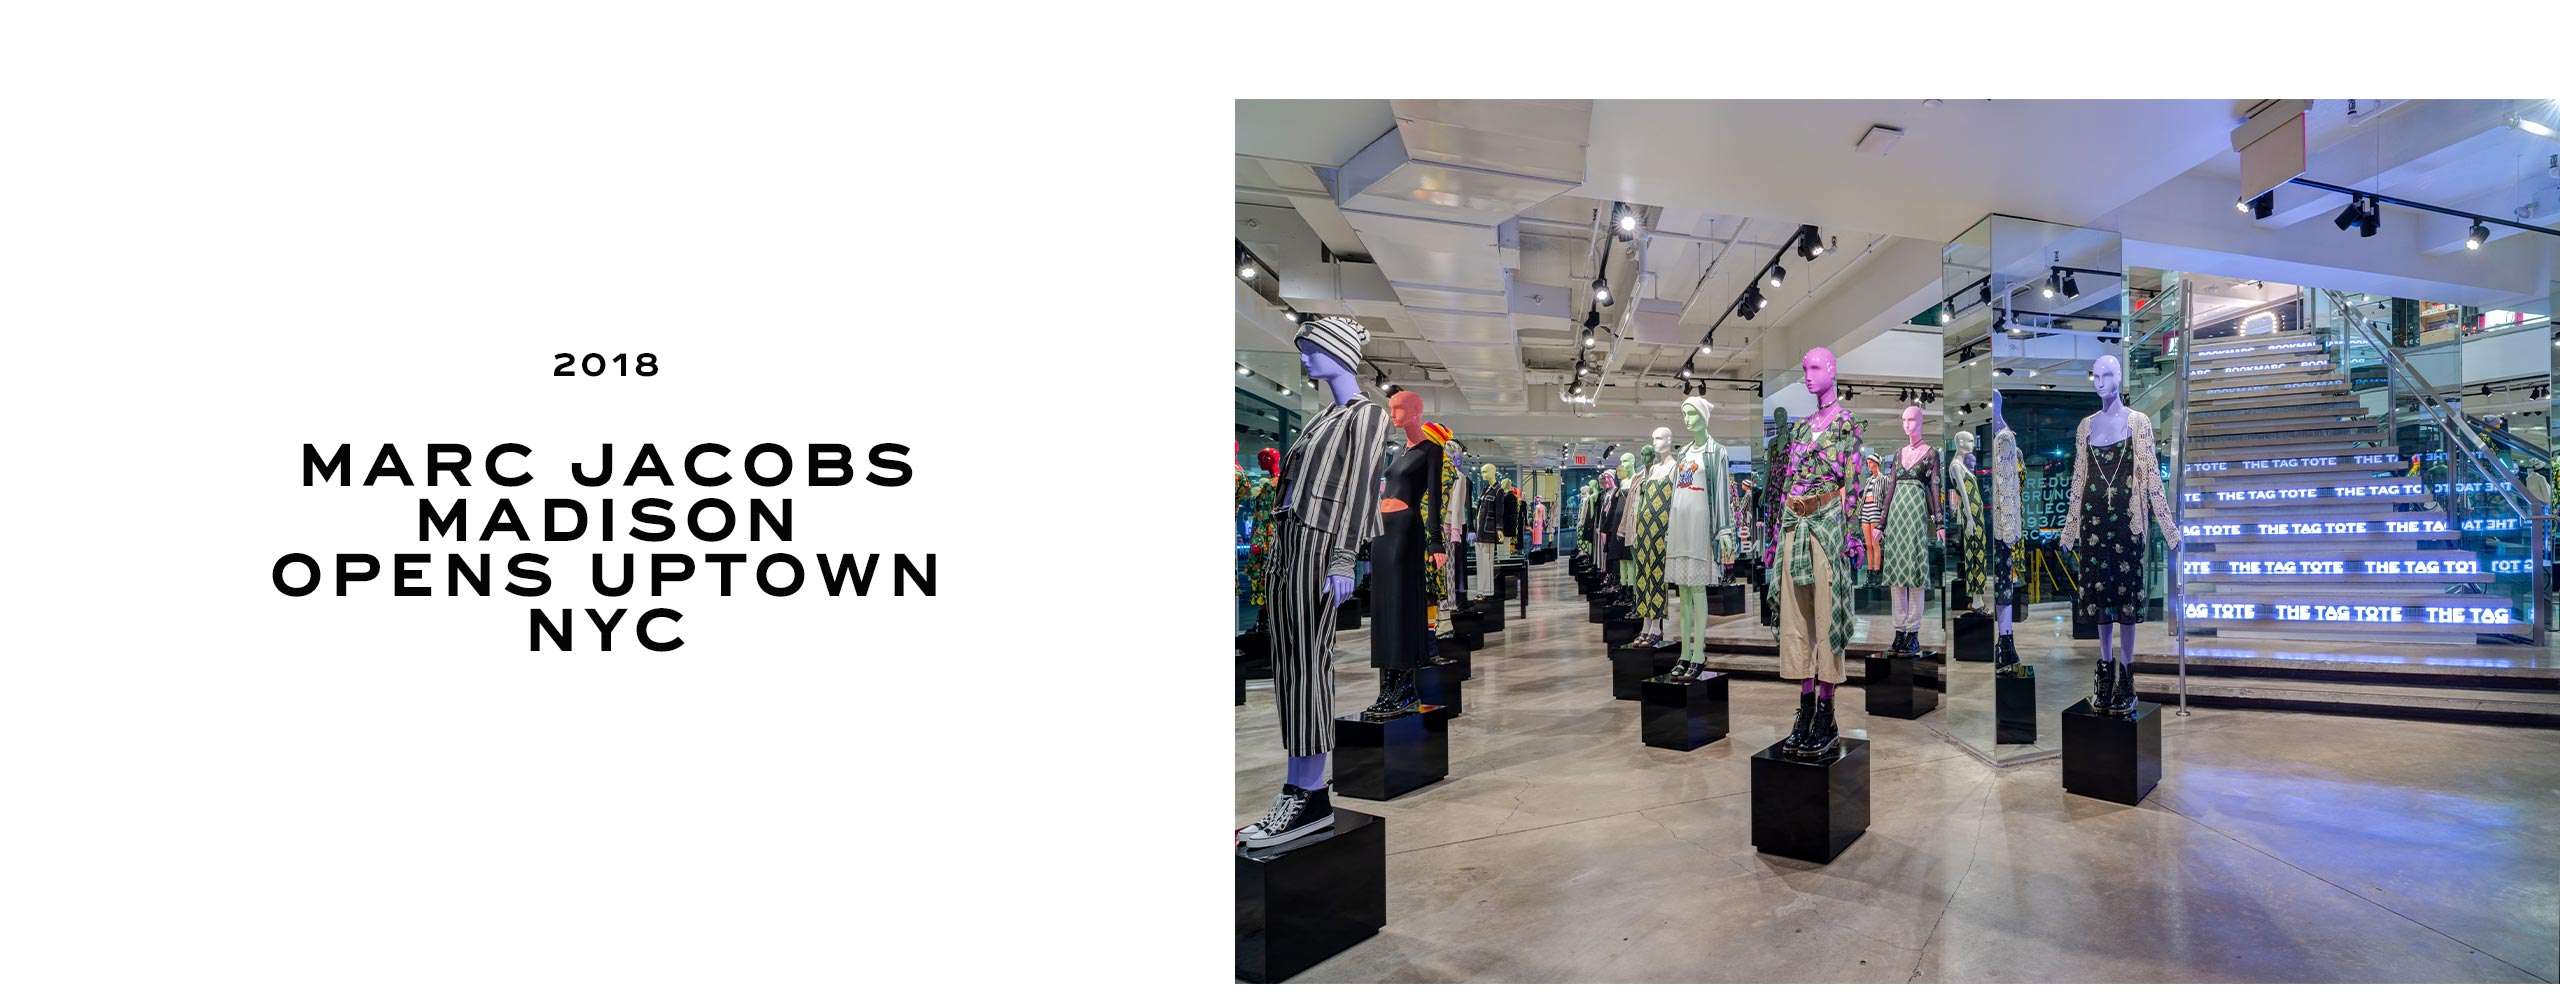 2018: Marc Jacobs Madison opens uptown NYC. 